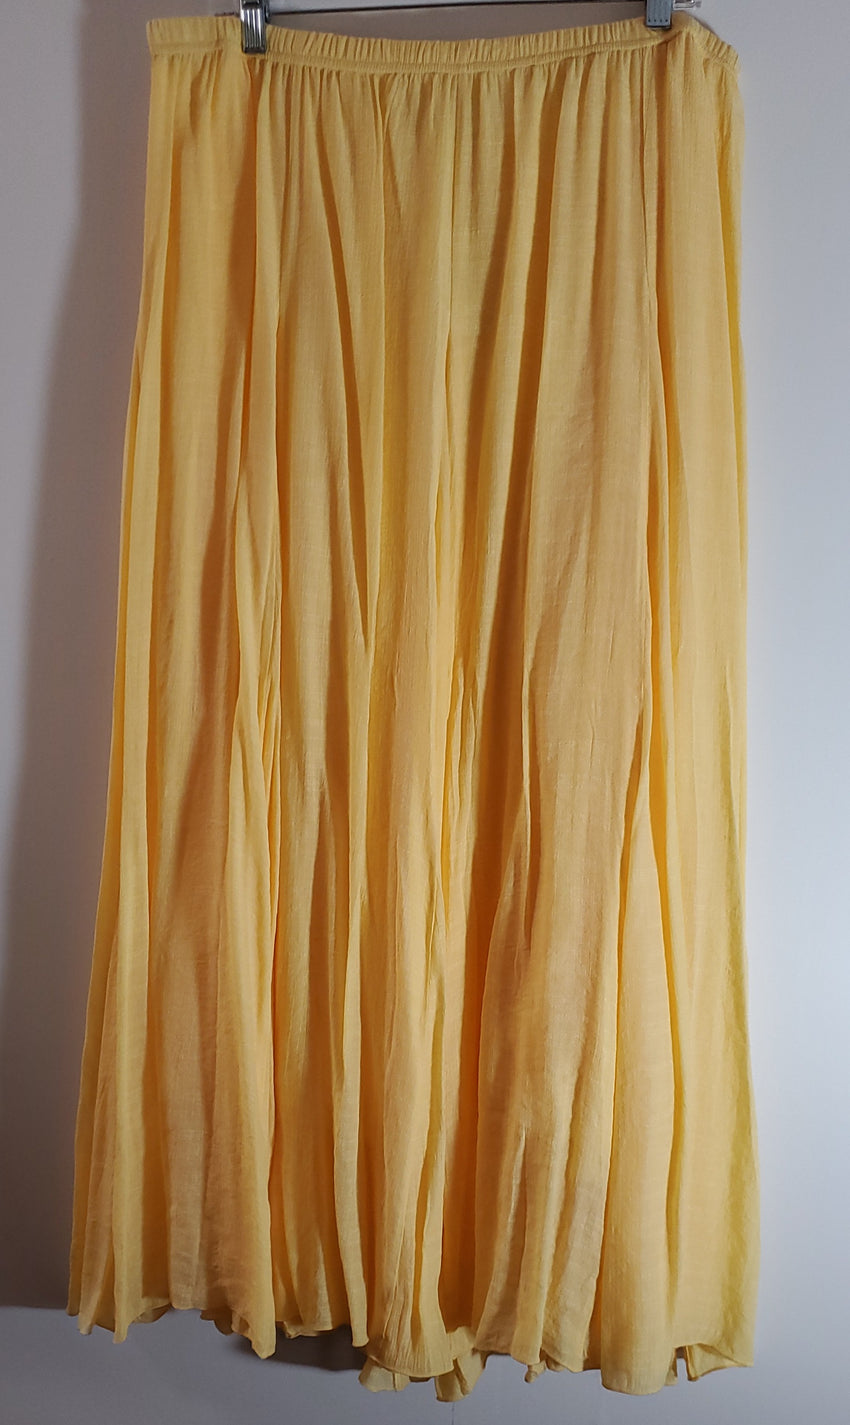 New Directions Ladies Long Yellow Skirt